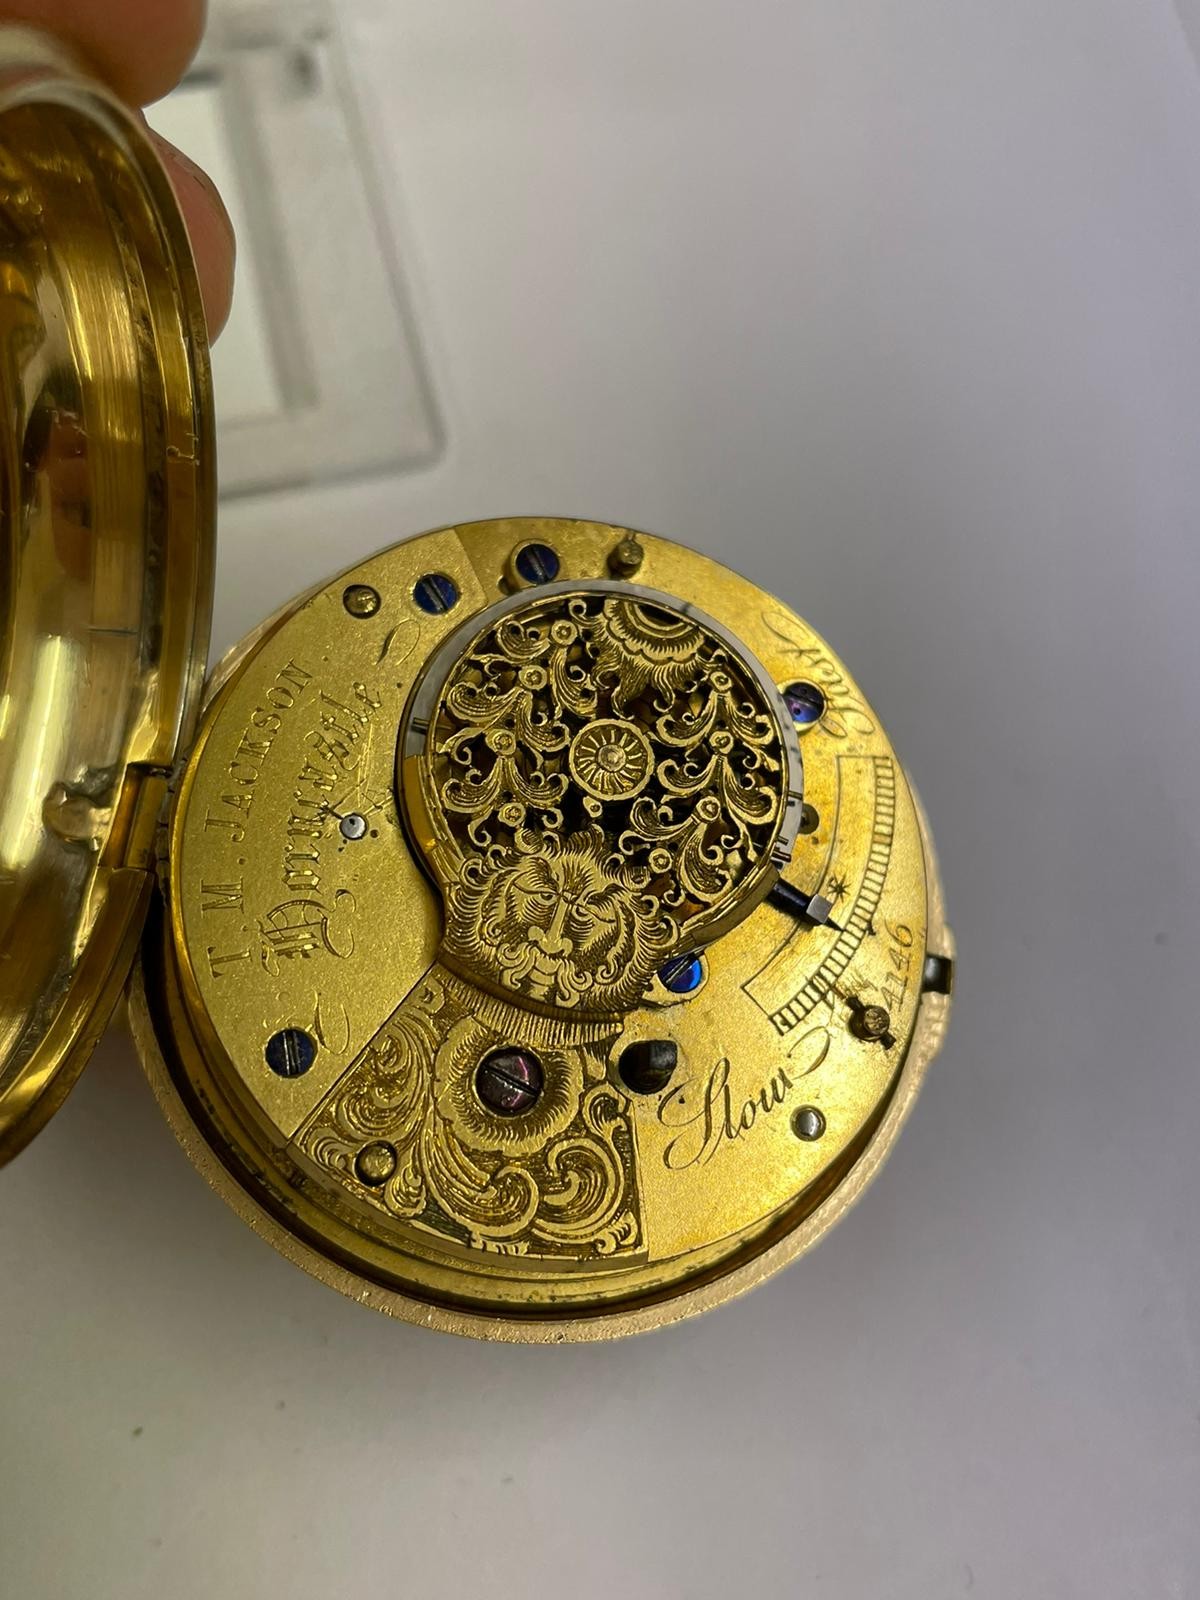 Antique very large yellow metal verge fusee pocket watch 172g Working but sold with no guarantees - Image 13 of 16